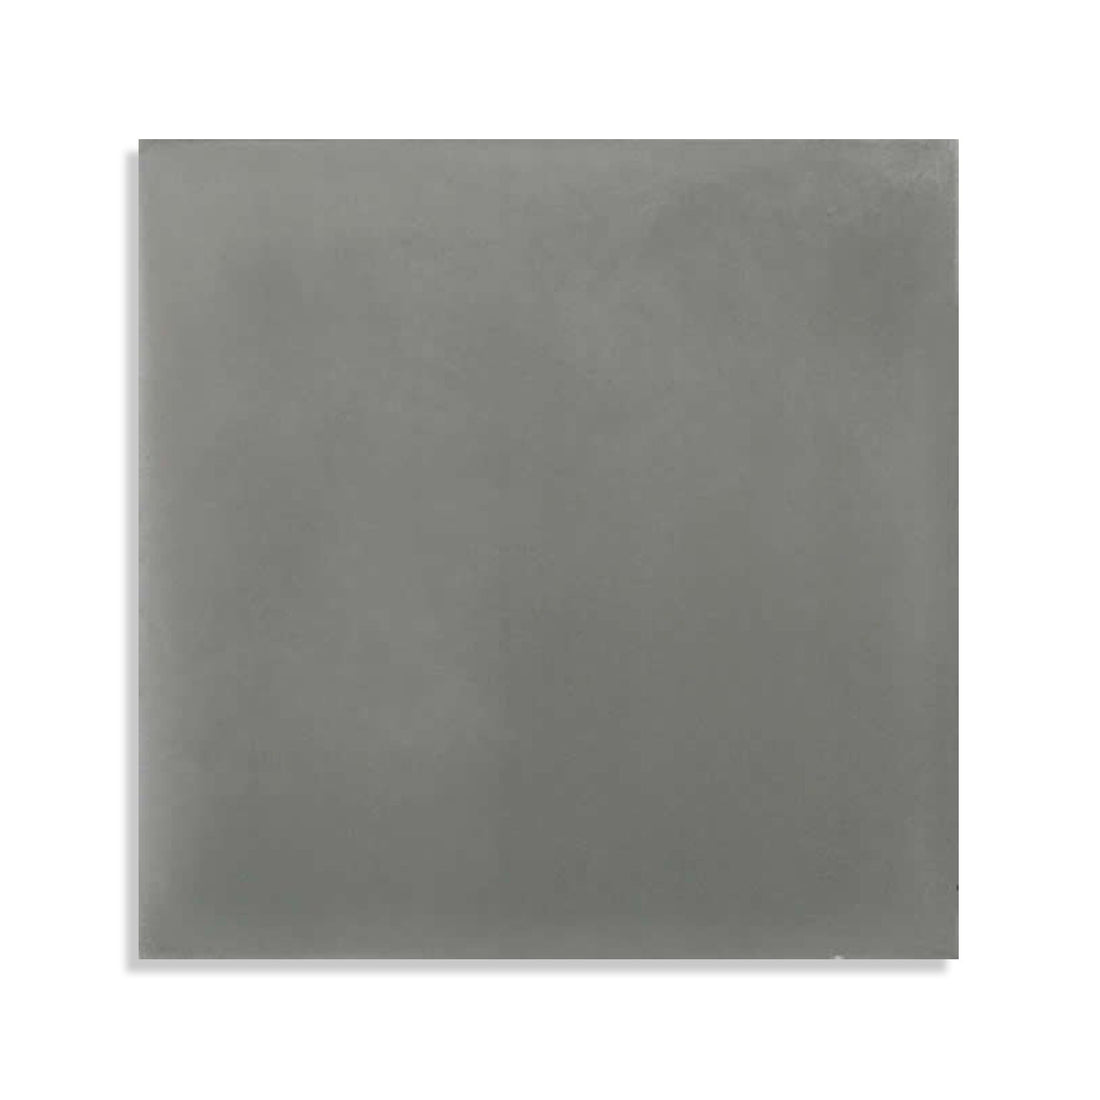 Moroccan Encaustic Cement Tile Grey, 20 x 20cm - Tiles &amp; Stone To You